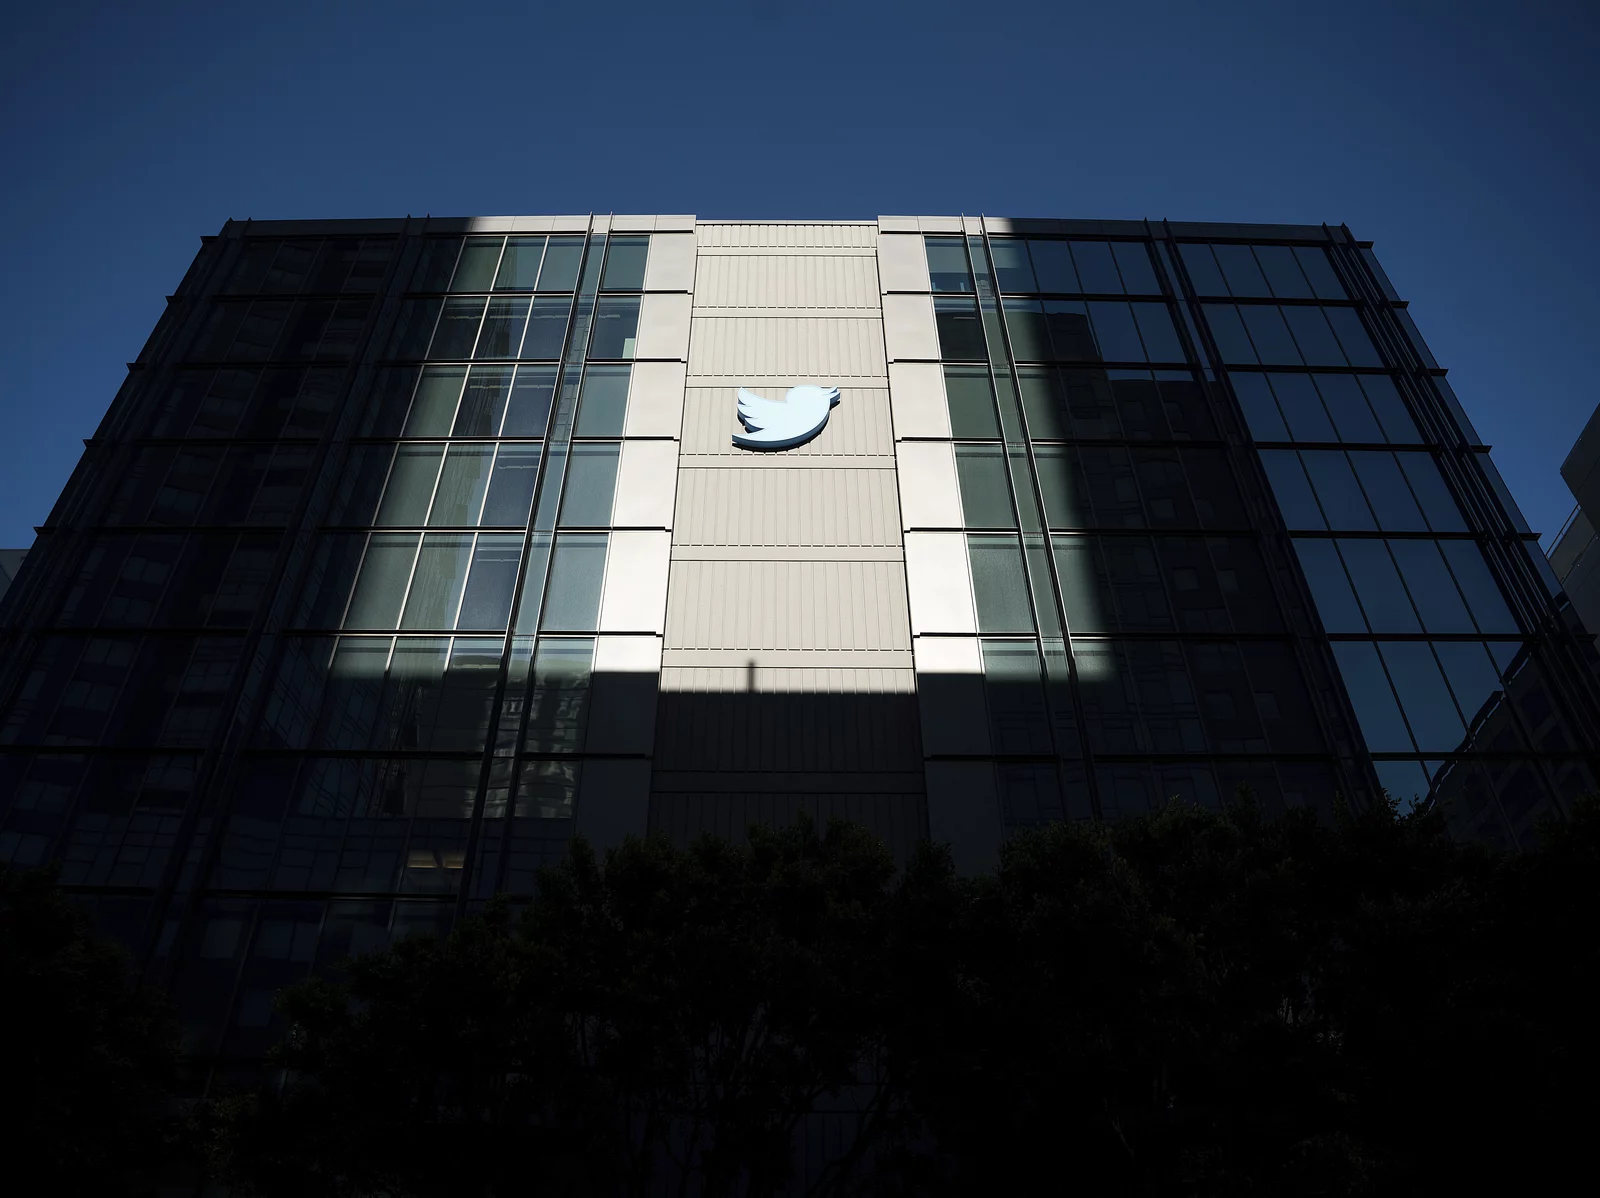 Twitter auctioned off office supplies, including a pizza oven and neon bird sign